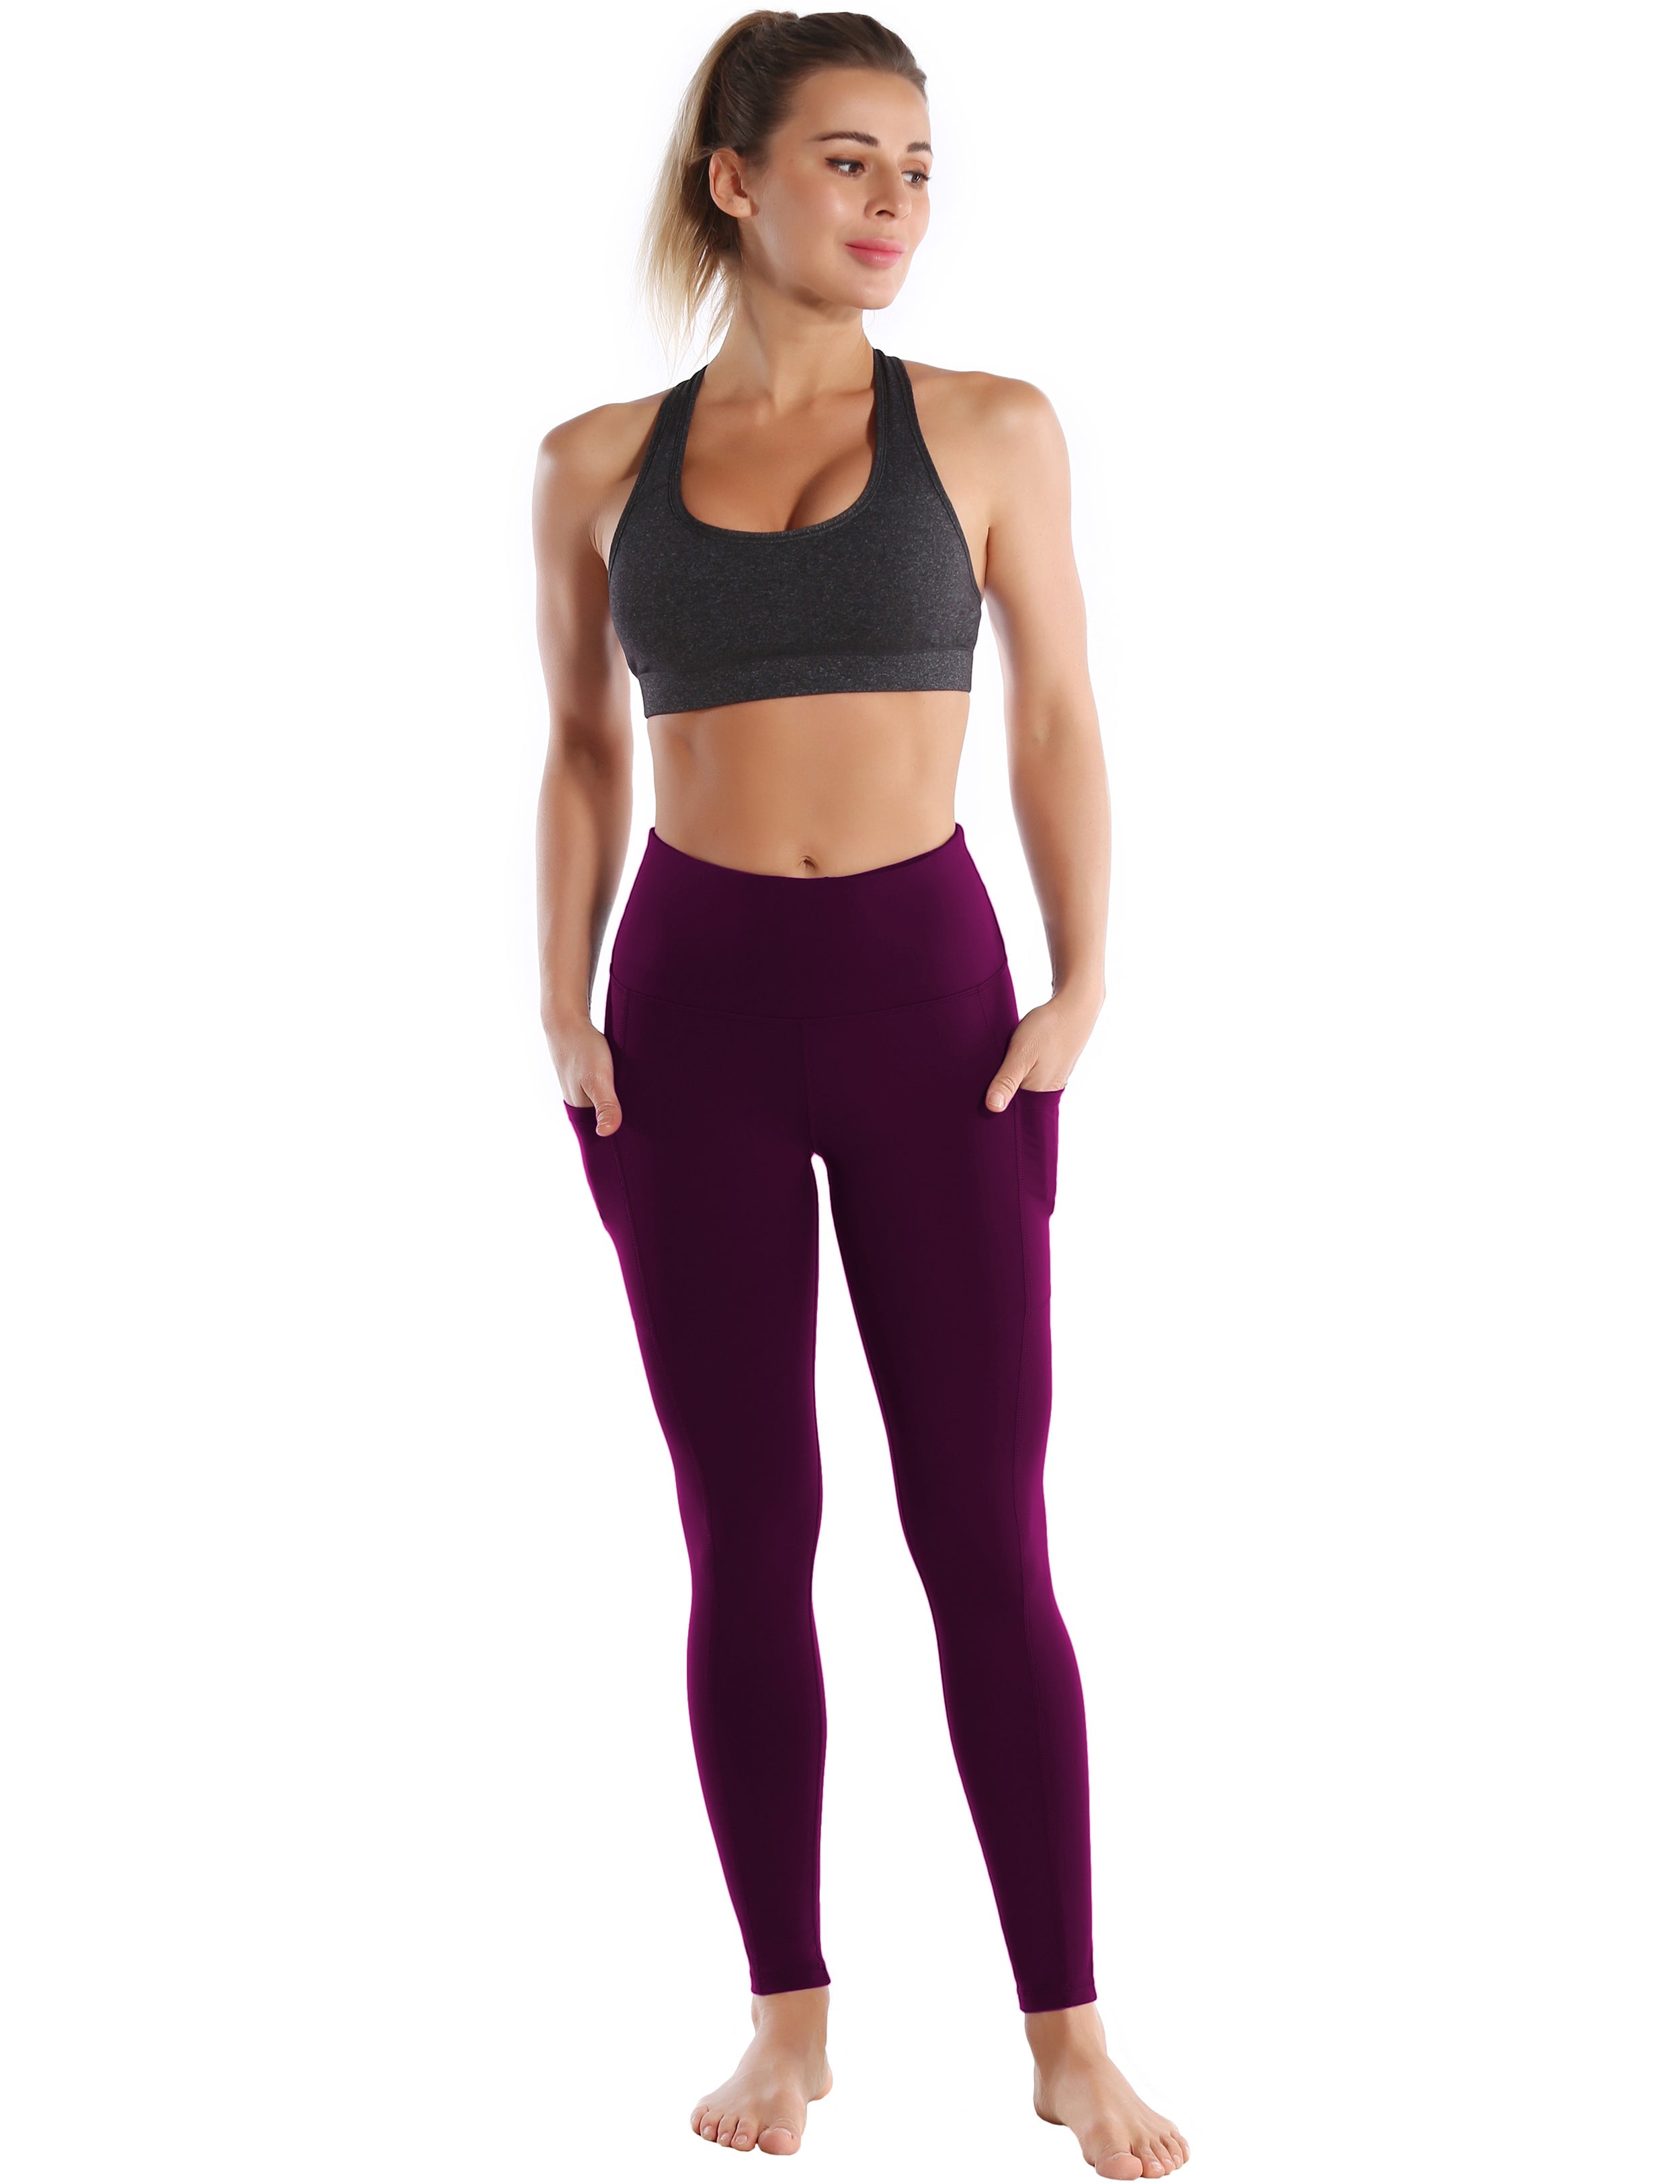 Hip Line Side Pockets Biking Pants plum Sexy Hip Line Side Pockets 75%Nylon/25%Spandex Fabric doesn't attract lint easily 4-way stretch No see-through Moisture-wicking Tummy control Inner pocket Two lengths